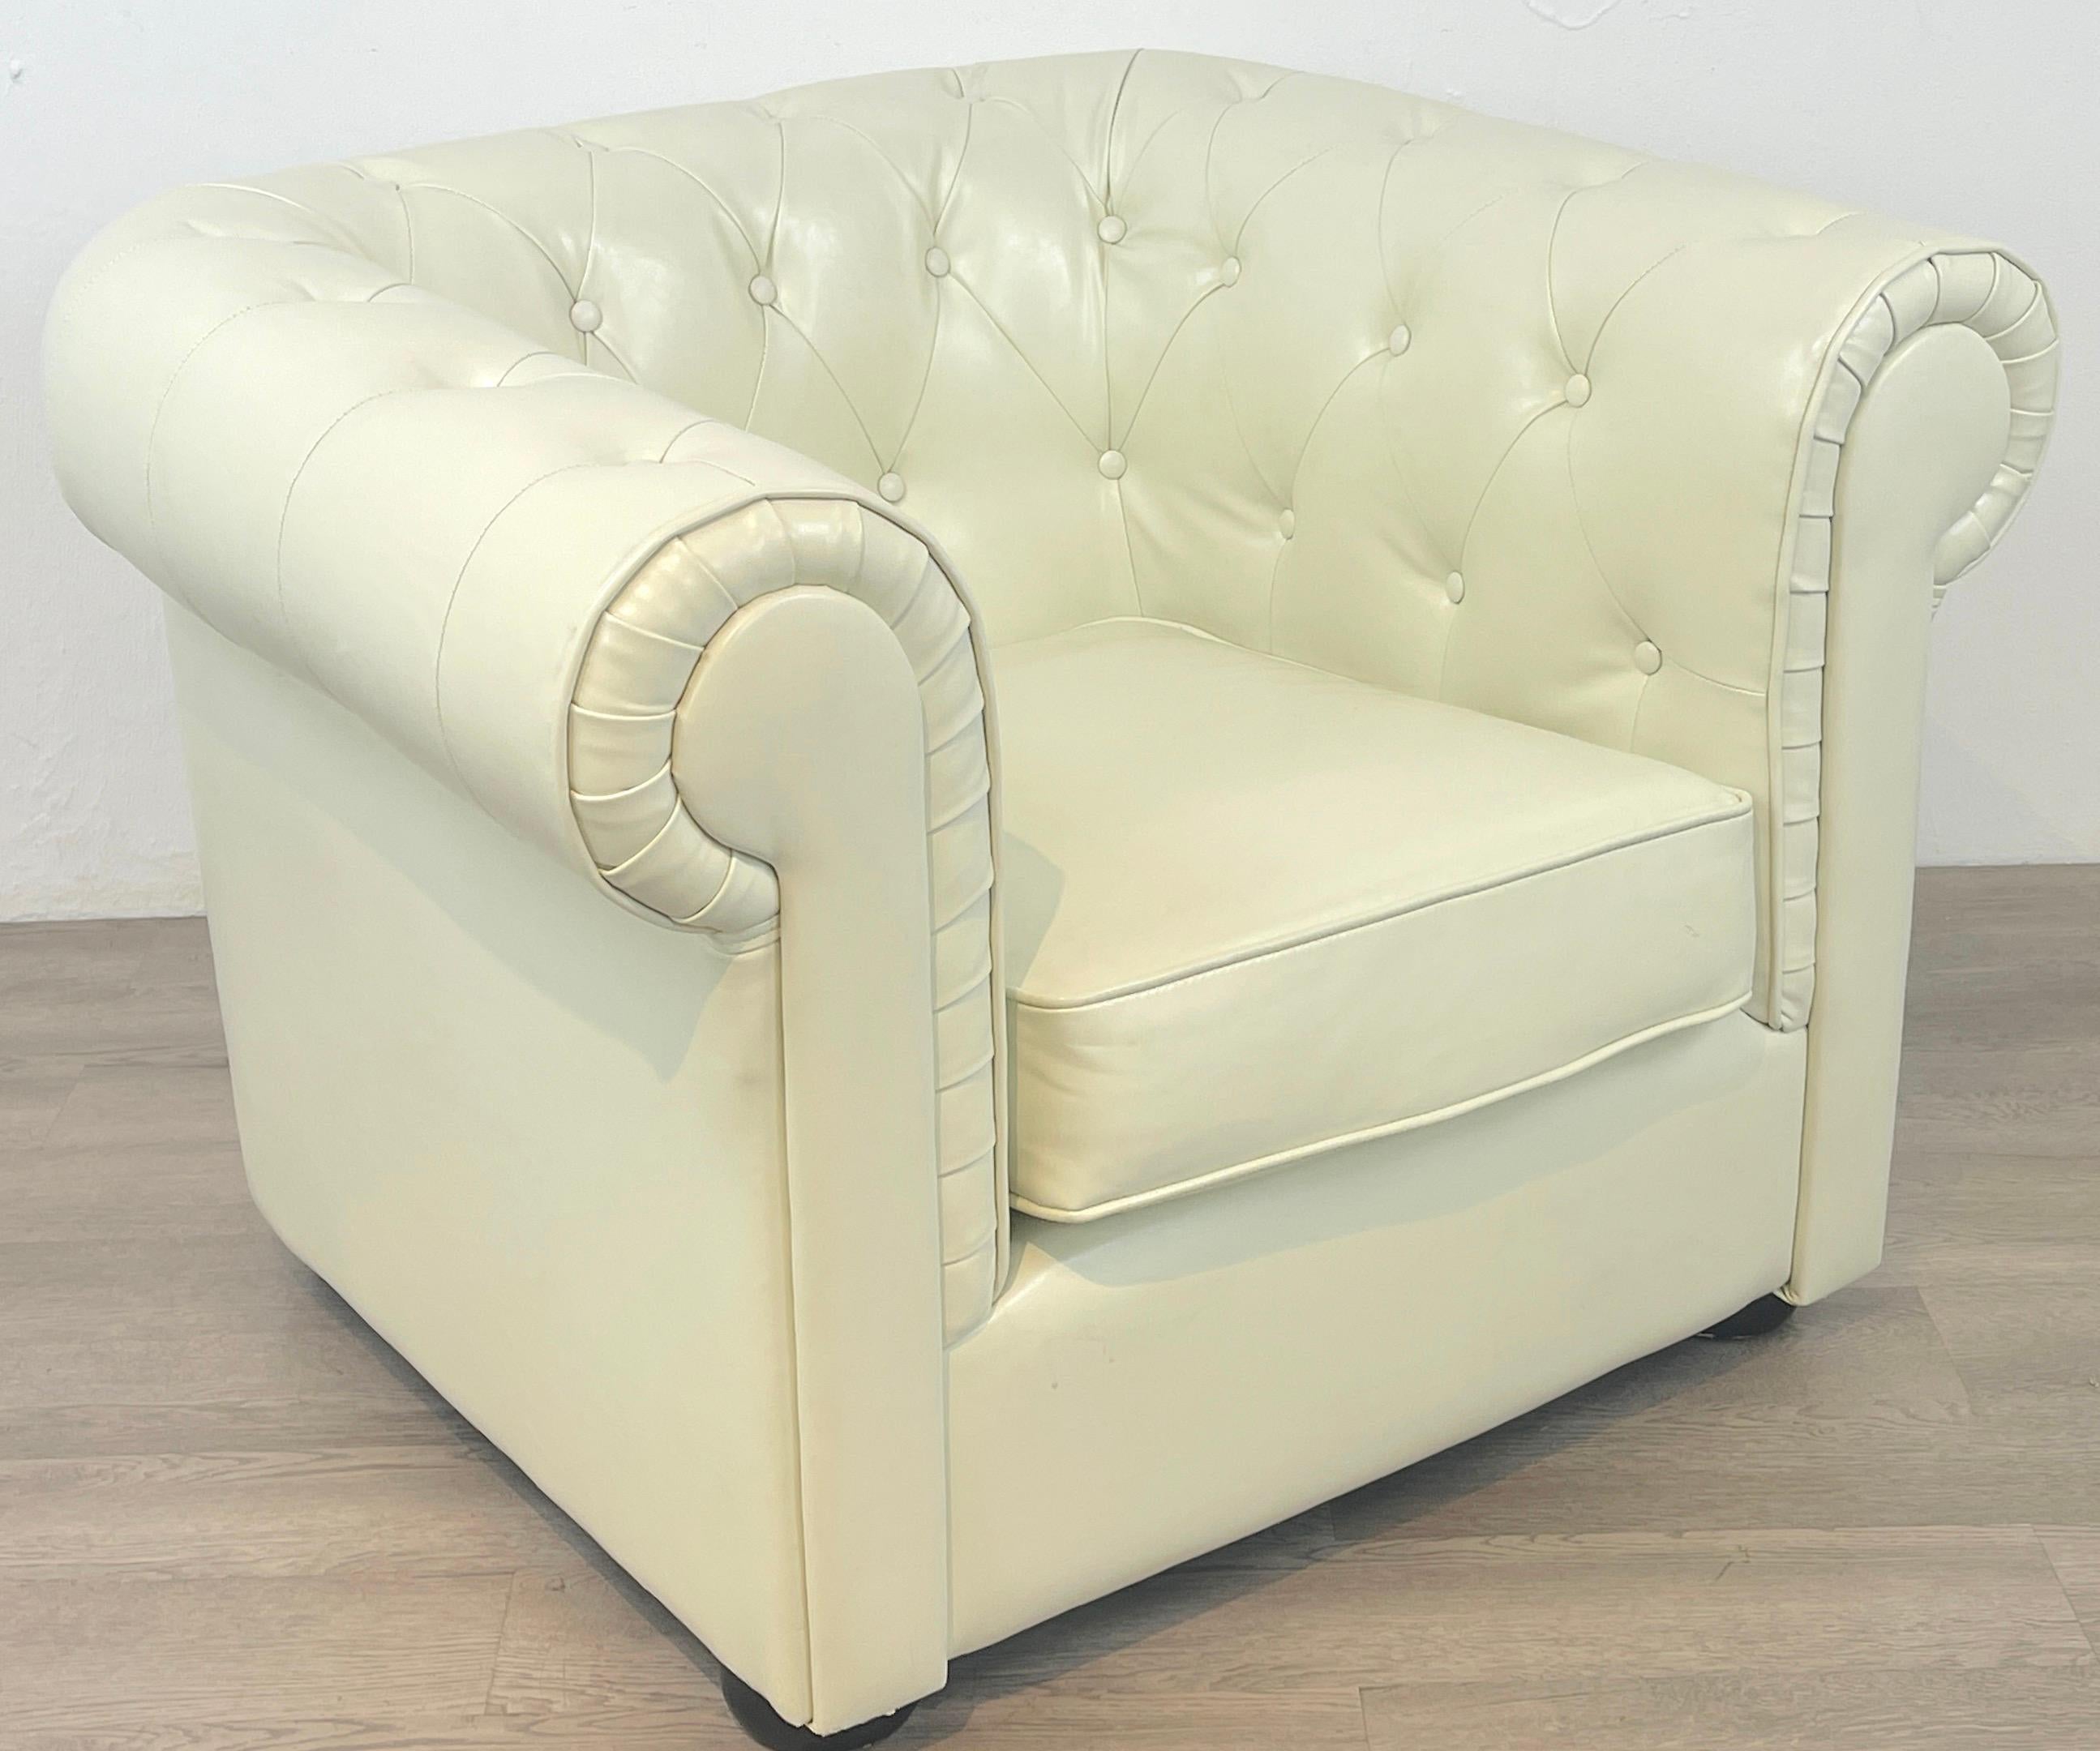 Pair of White Leather Chesterfield Club Chairs For Sale 6